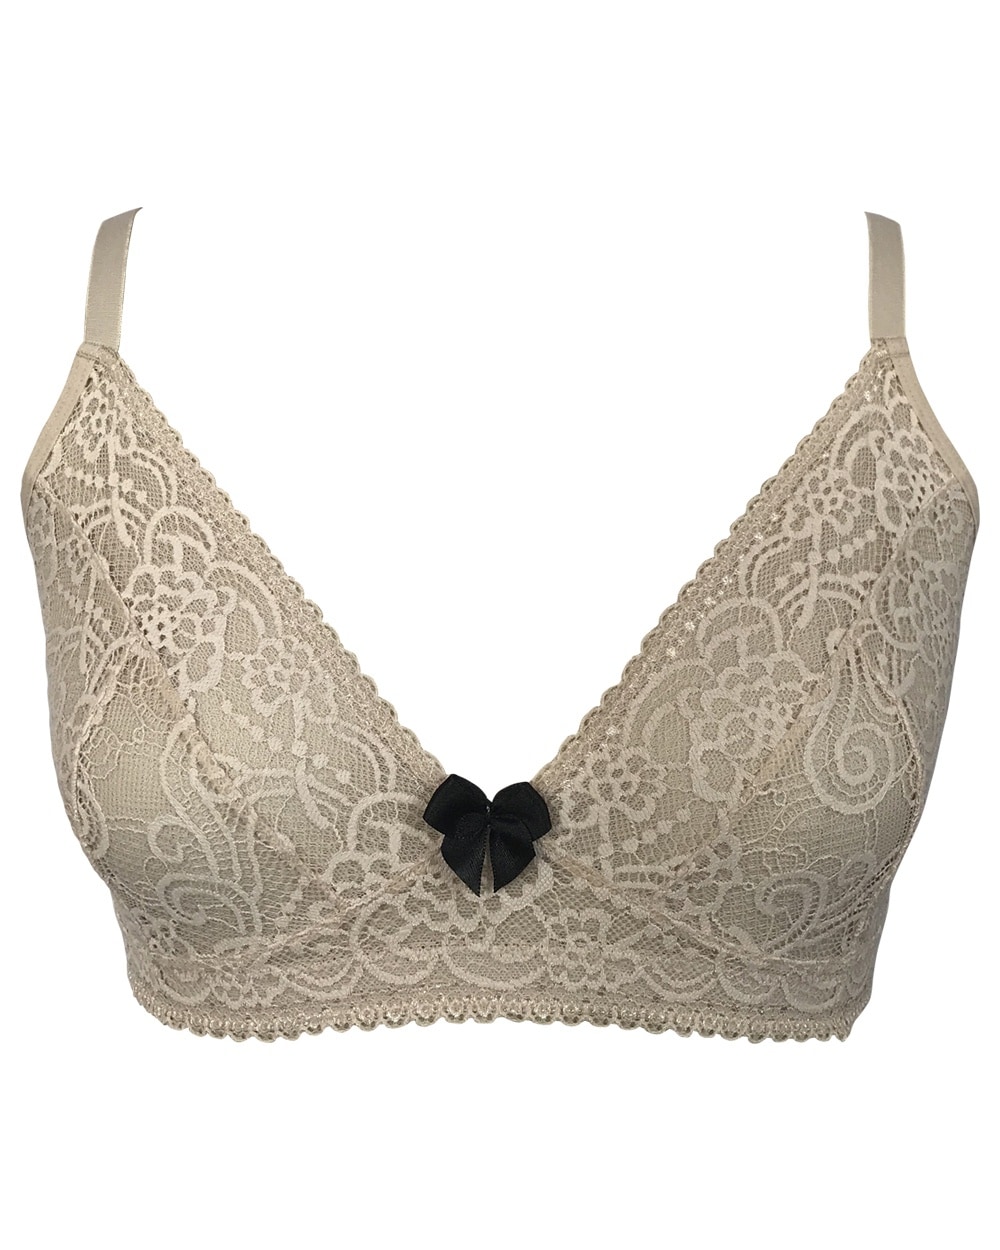 AnaOno Pocketed Front Closure Post Surgery Bra, Sand, Size XXXL, from Soma